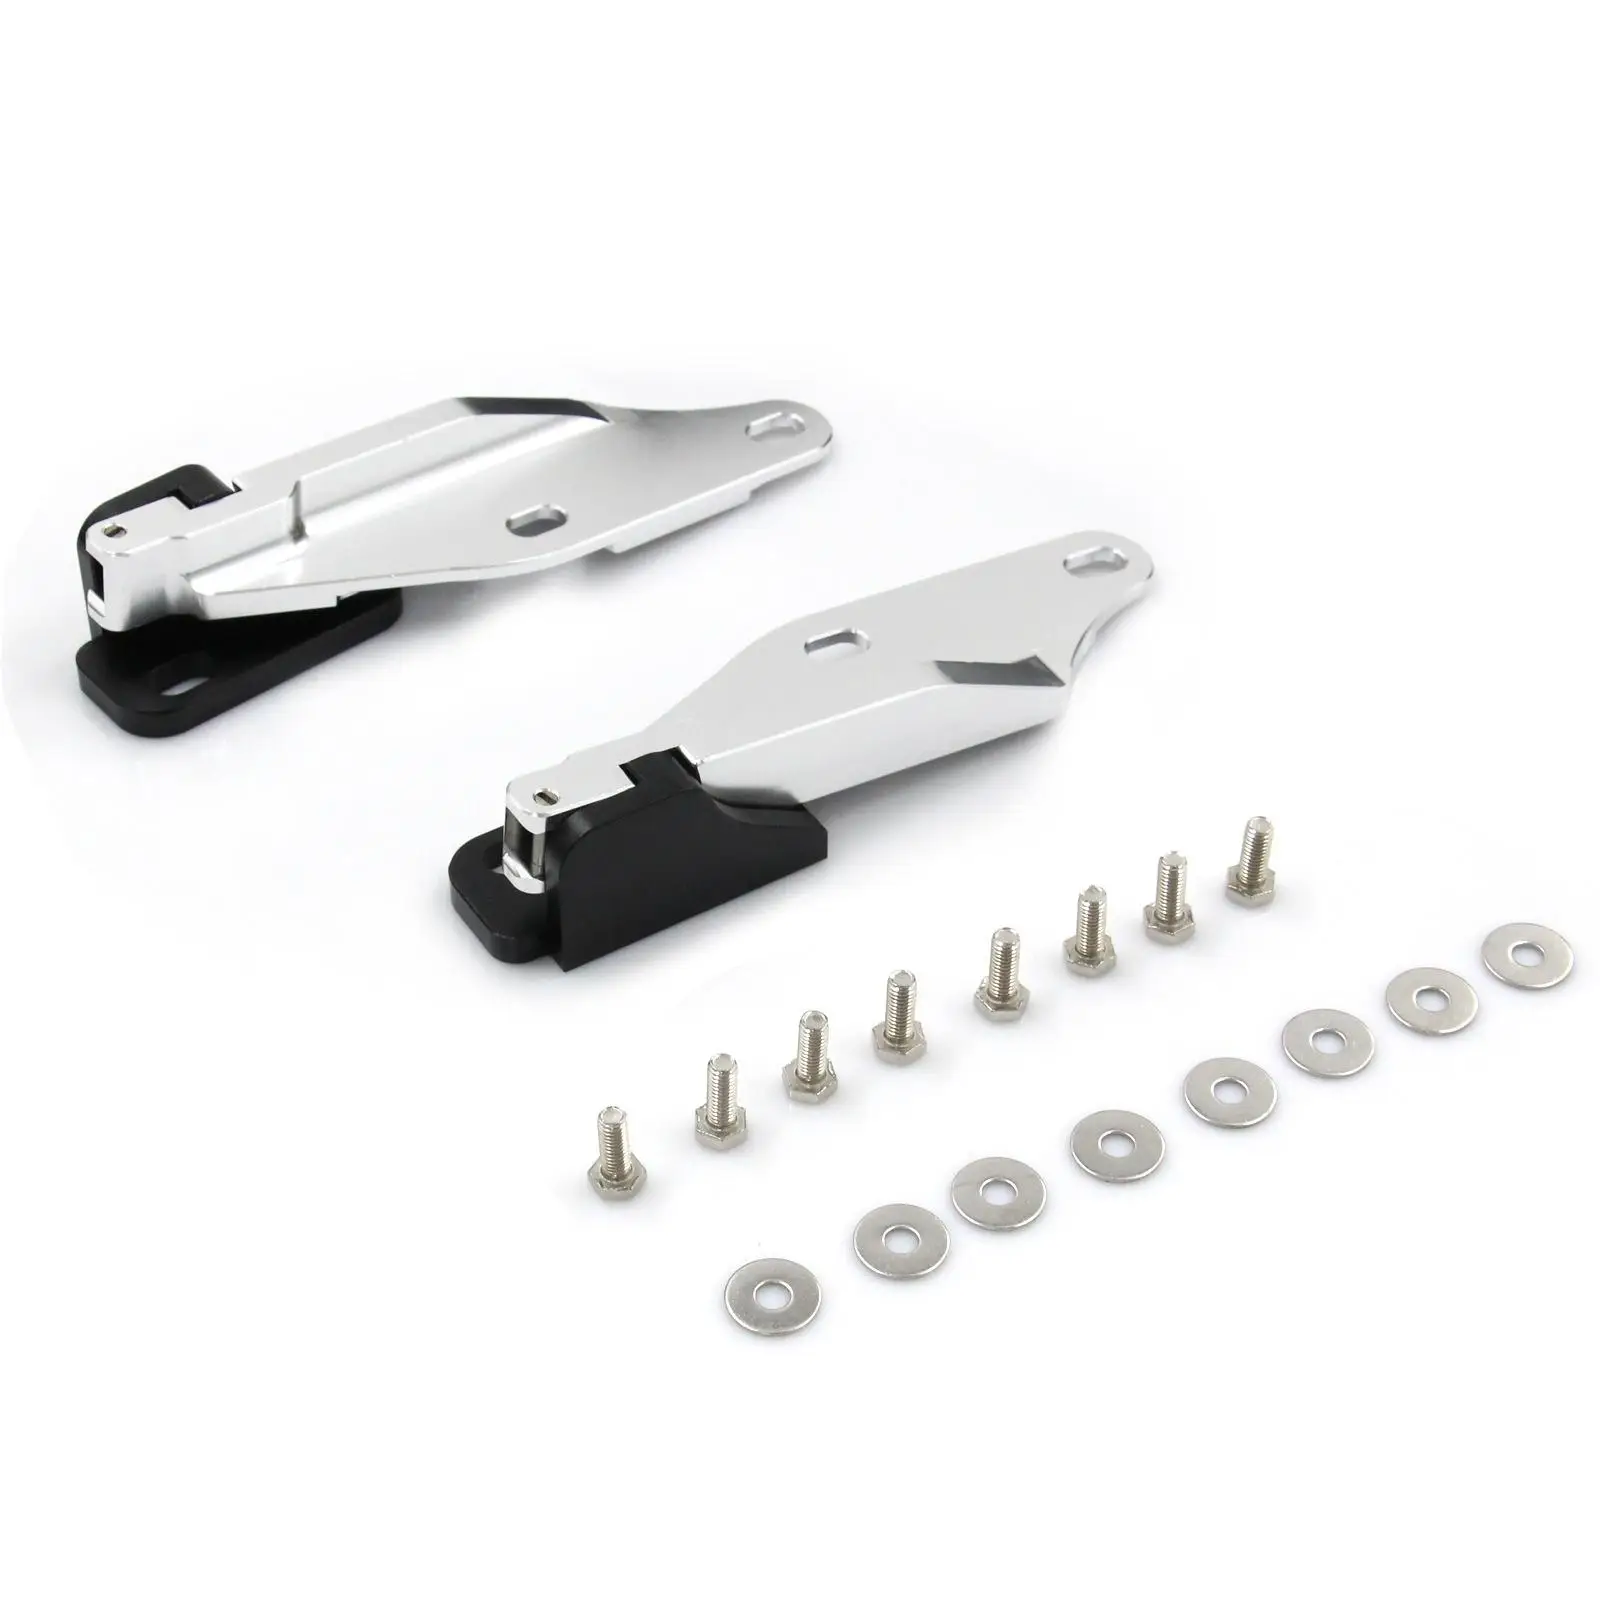 2 Pieces Quick Release Hood Hinge Bonnet Latch High Strength Vehicle Sturdy Accessory for Honda CRV RD Civic EK Replaces